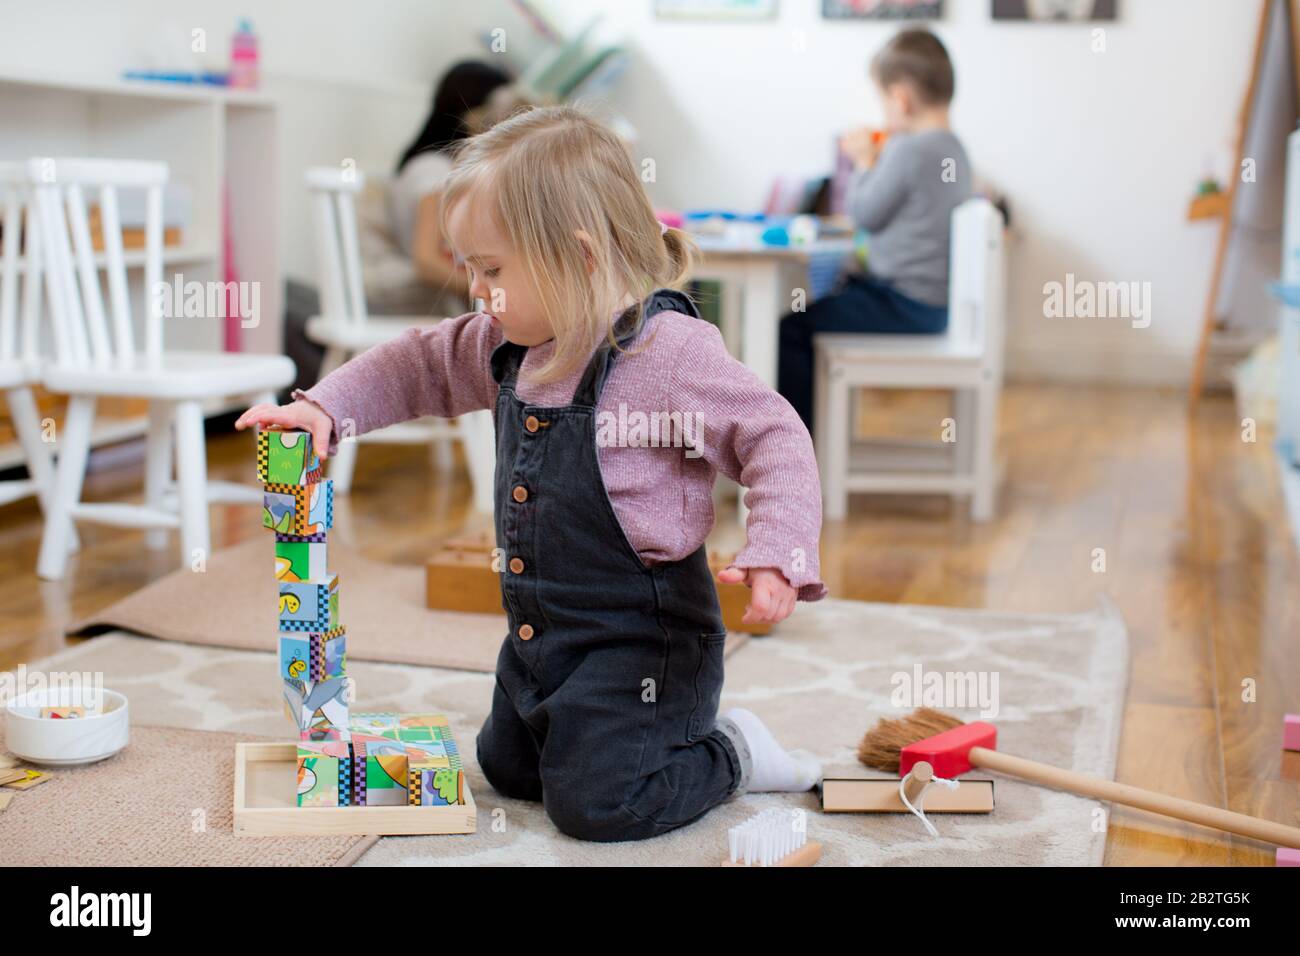 1 year old building a tower Stock Photo